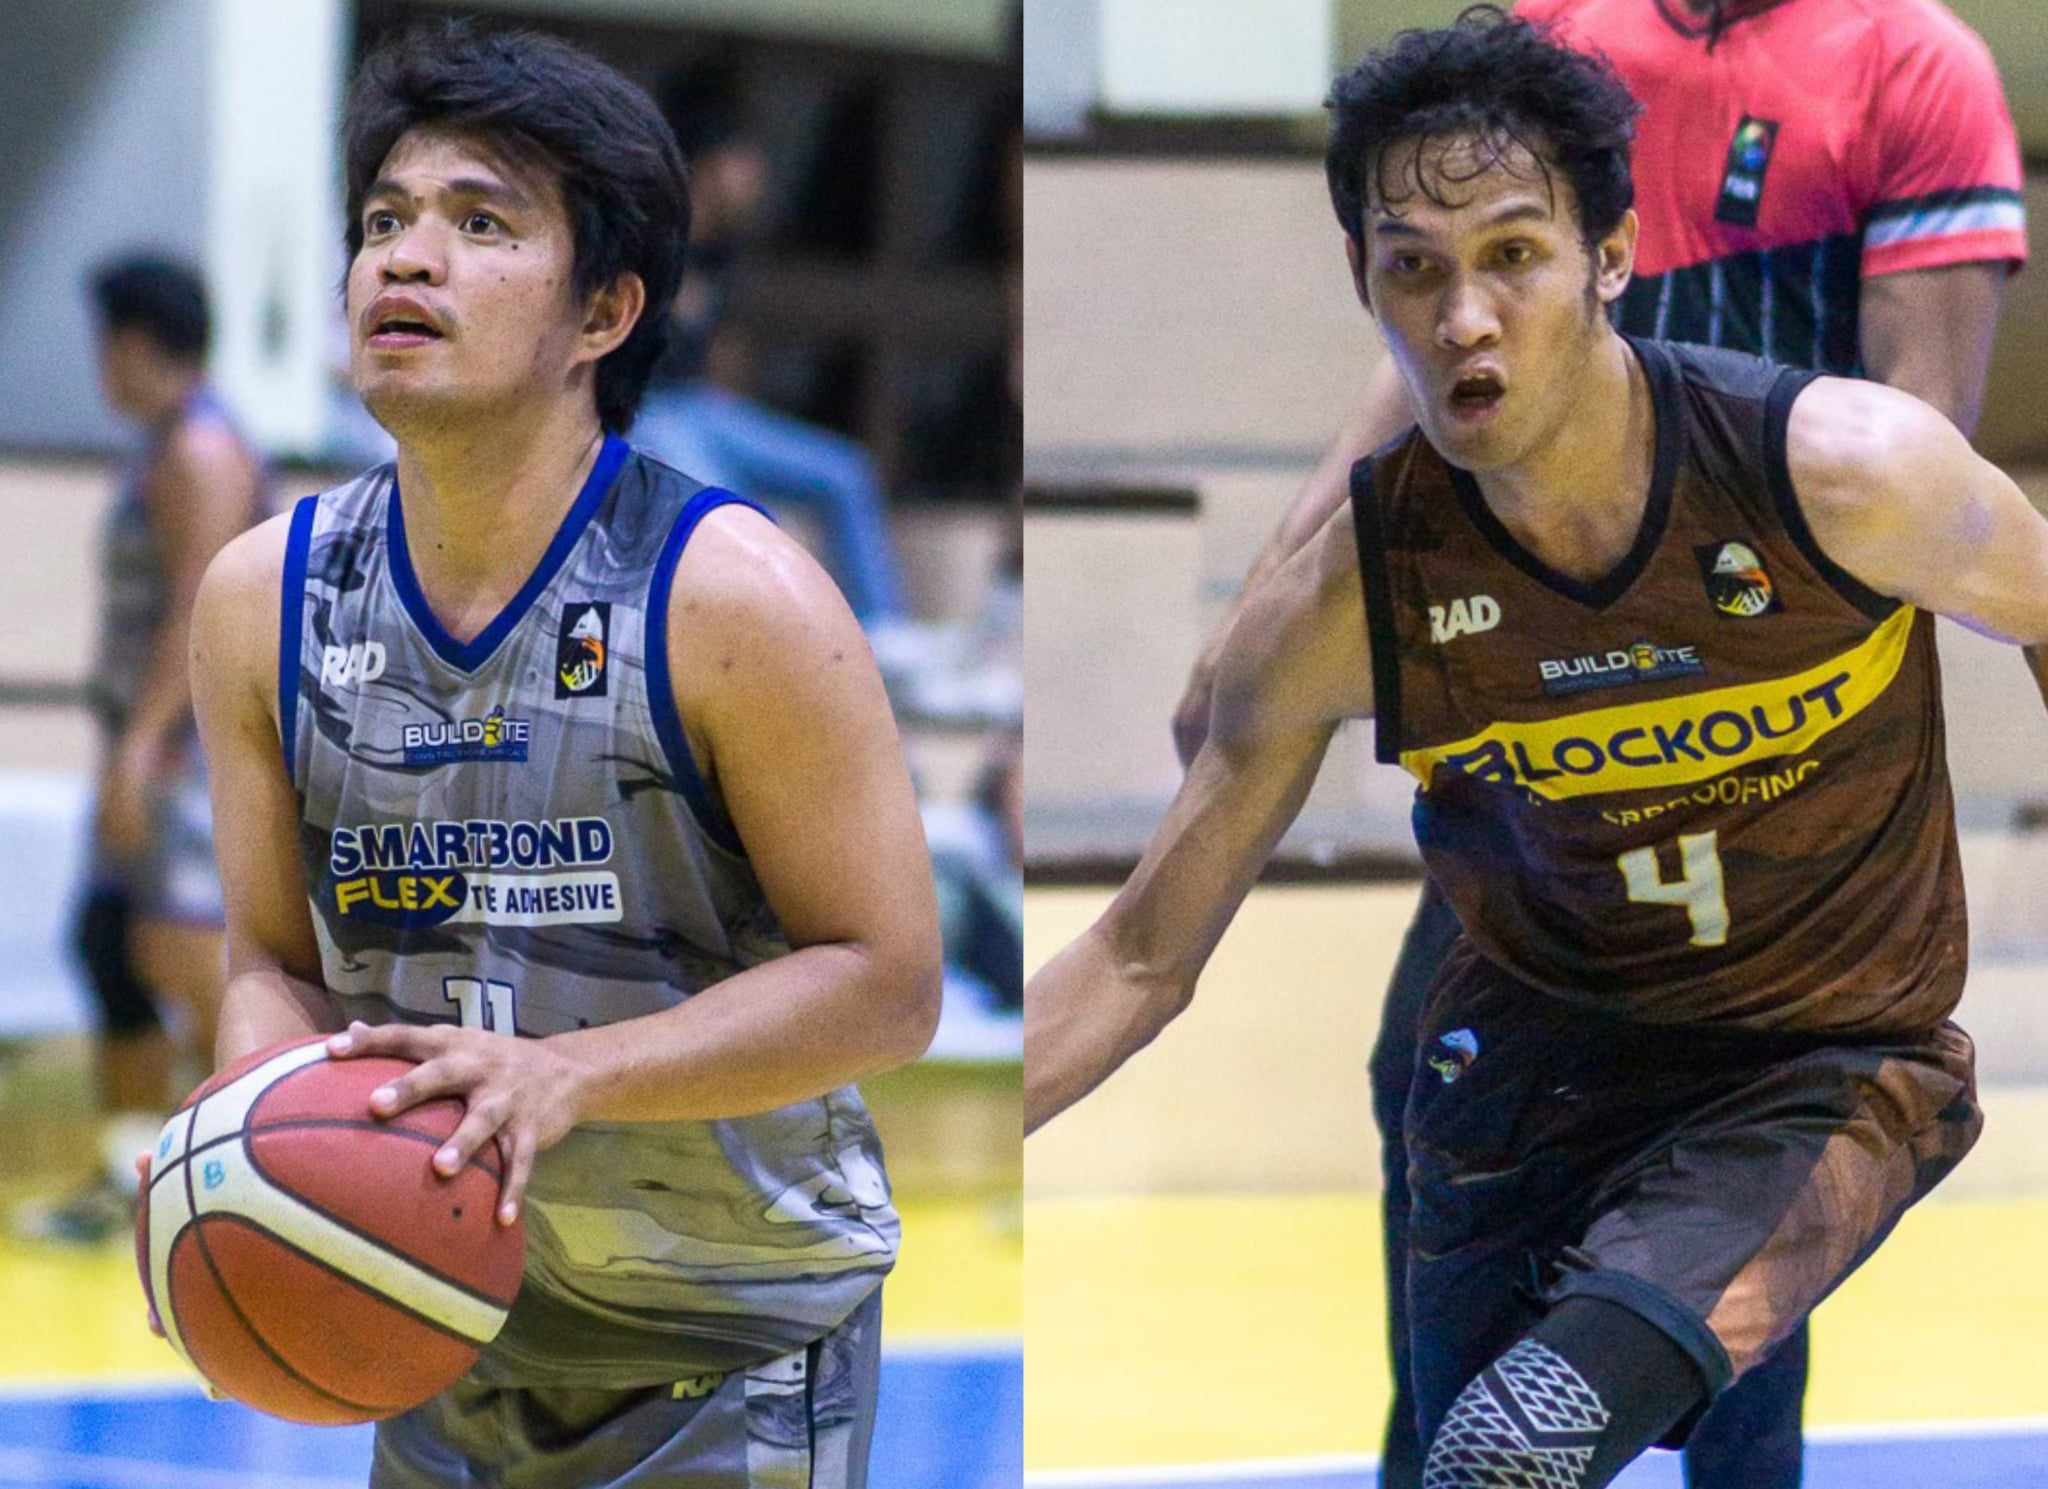 Smartbond, Blockout stage massive upsets in AEBC Buildrite Cup 2023